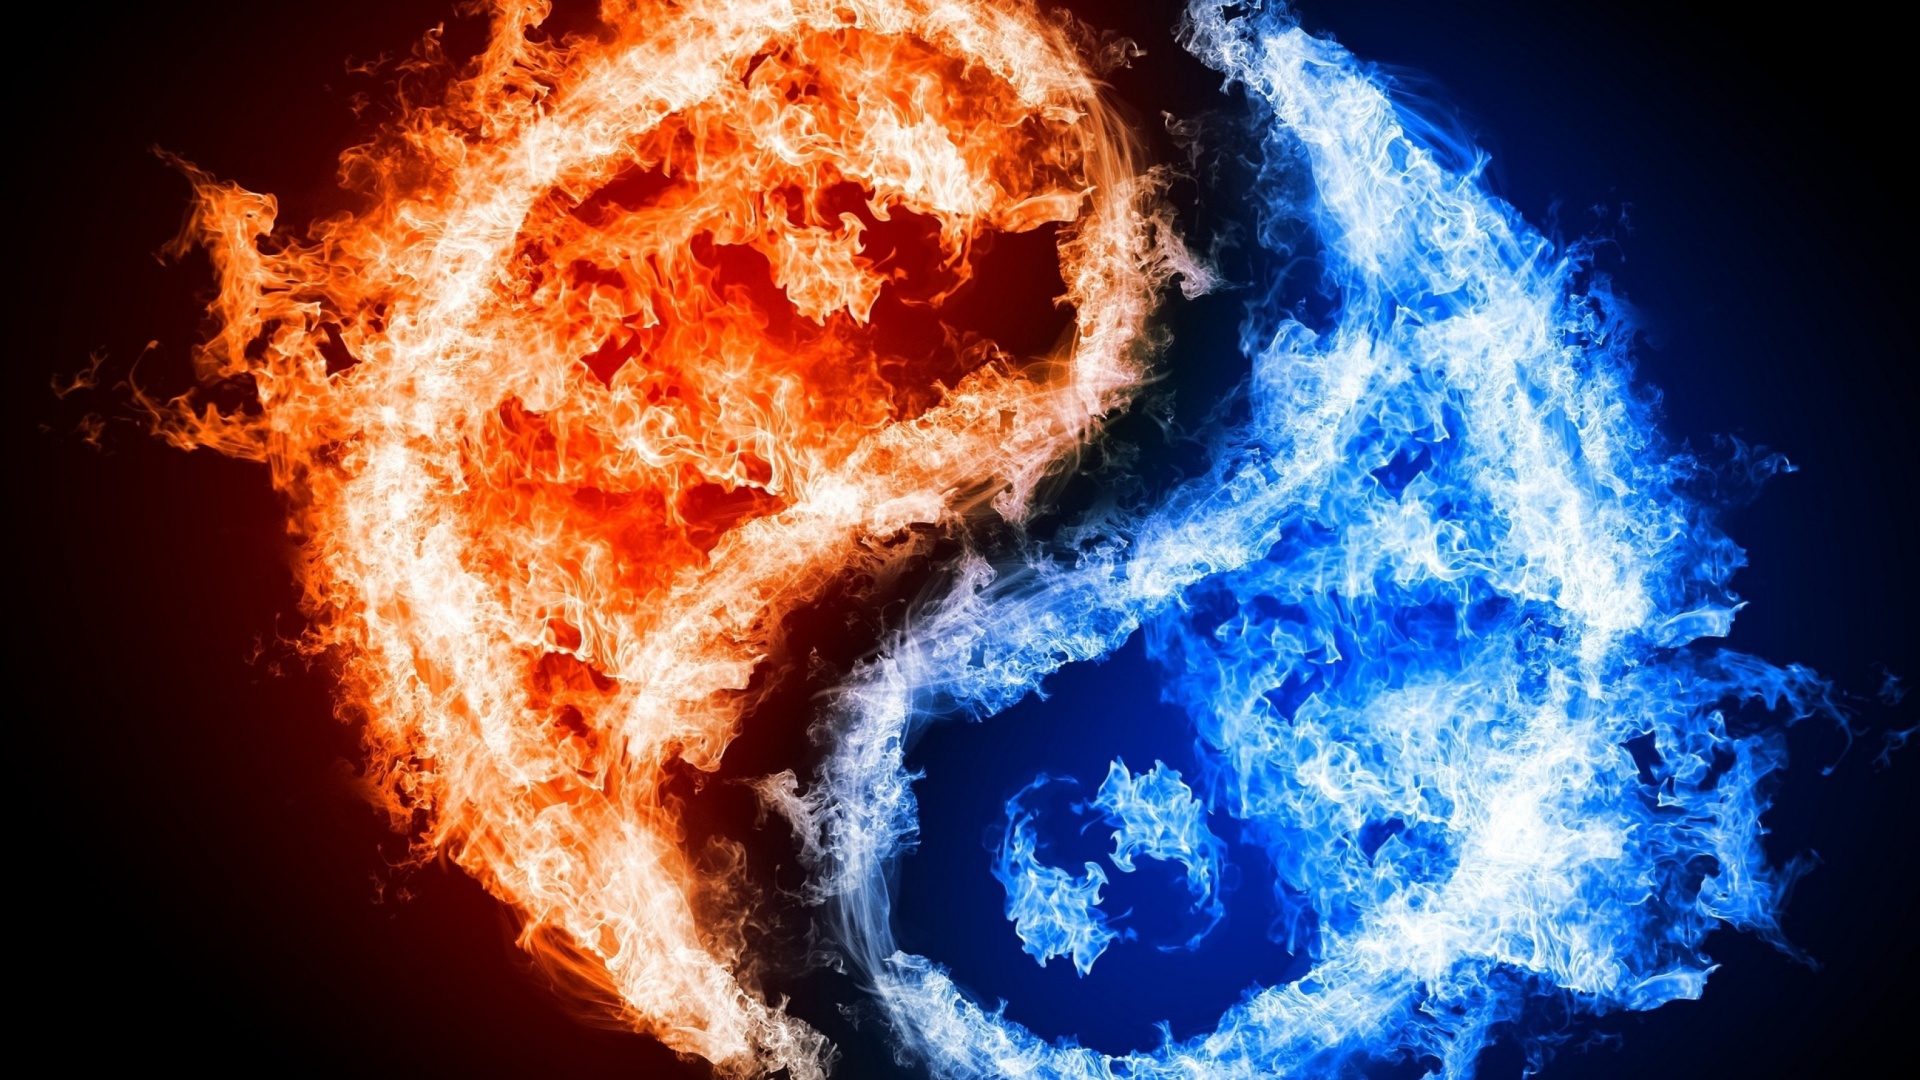 Yin and yang, fire and water wallpaper 1920x1080